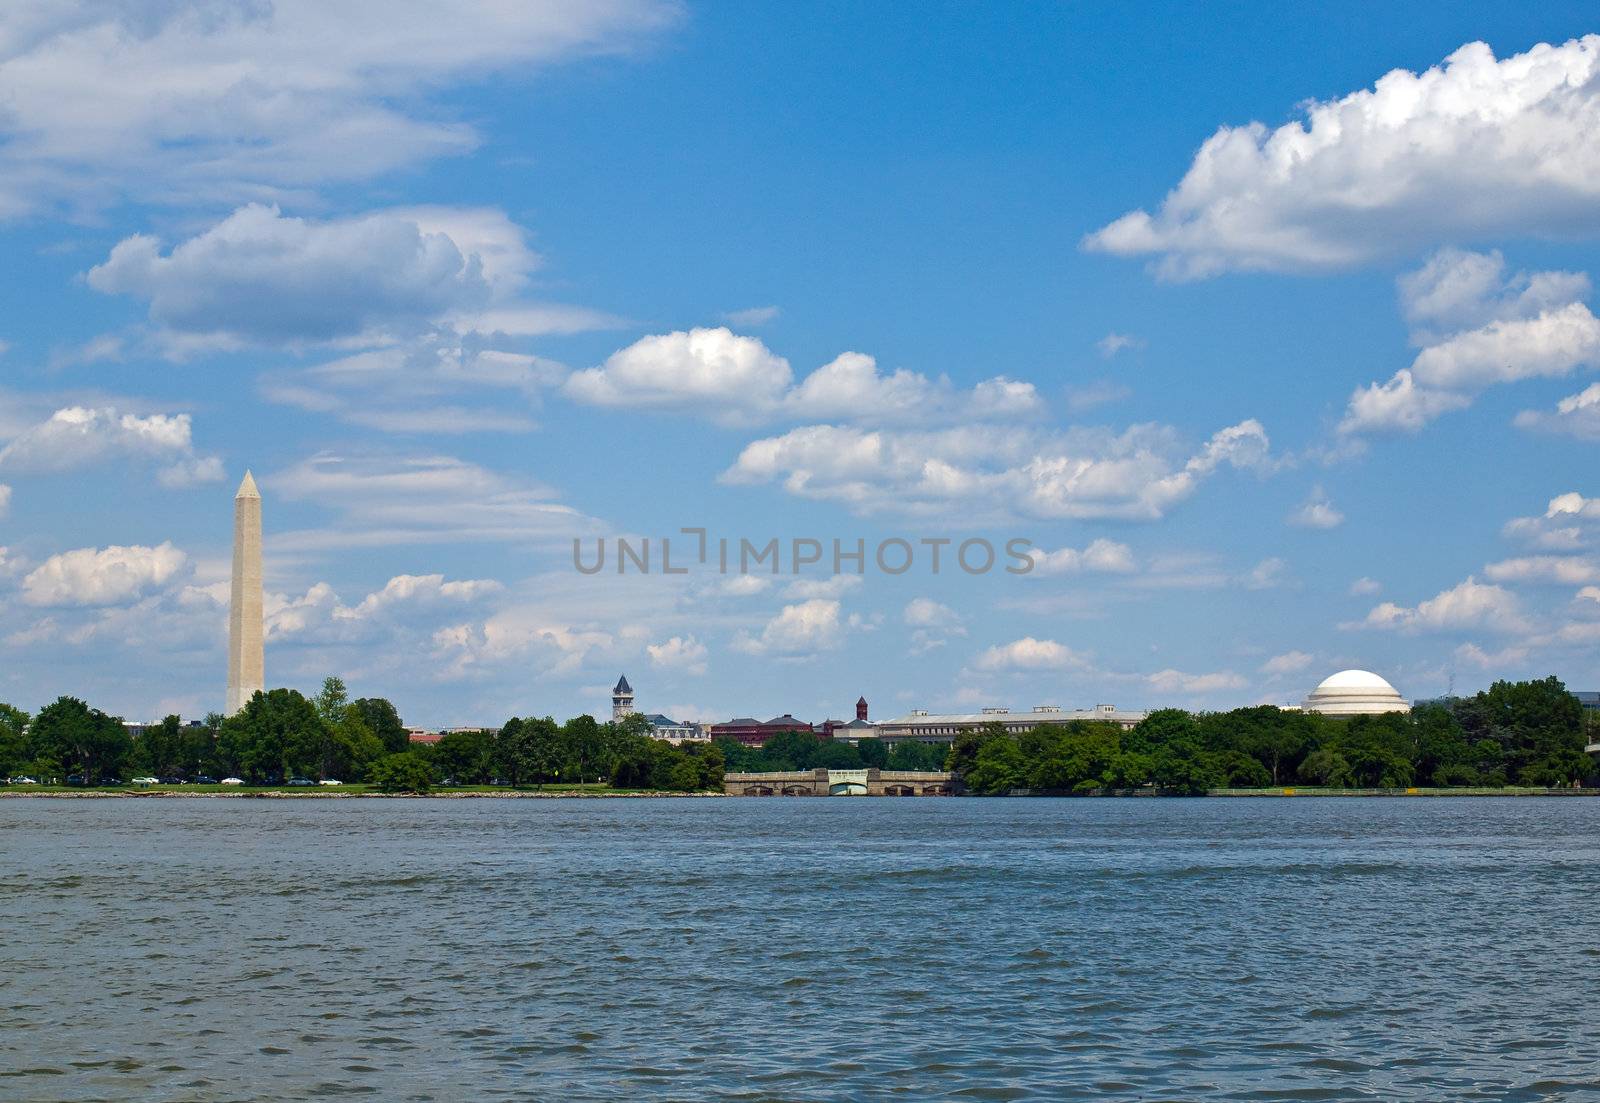 The Washington Monument and Jefferson Memorial in Washington DC as Seen from the Potomac River